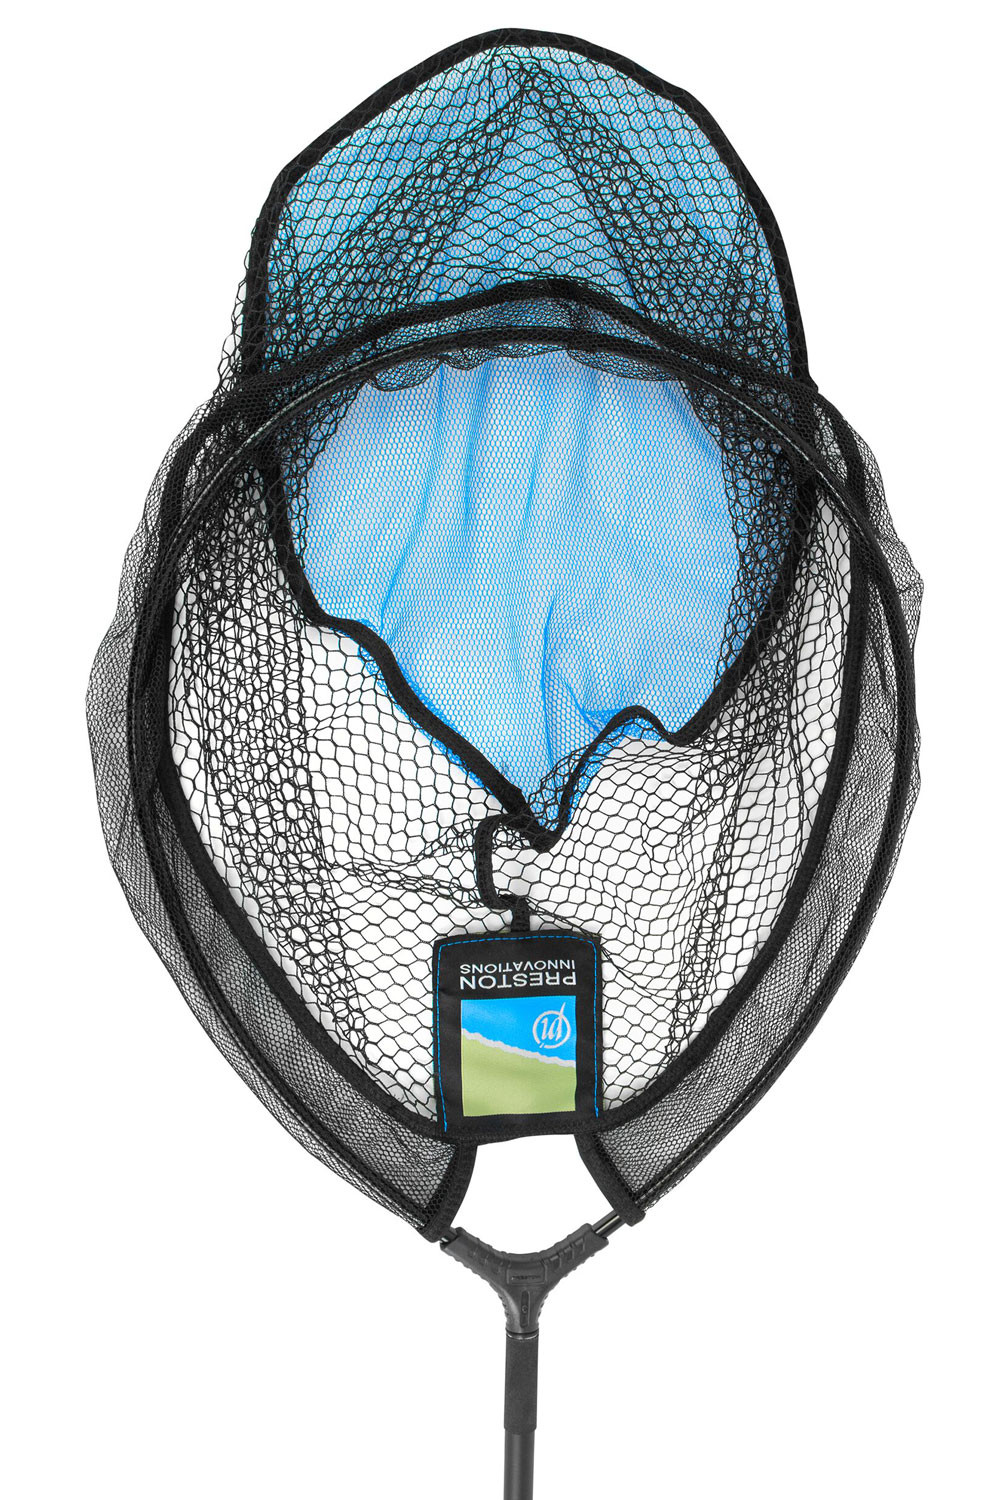 Nufish Weigh Net - The Tackle Store